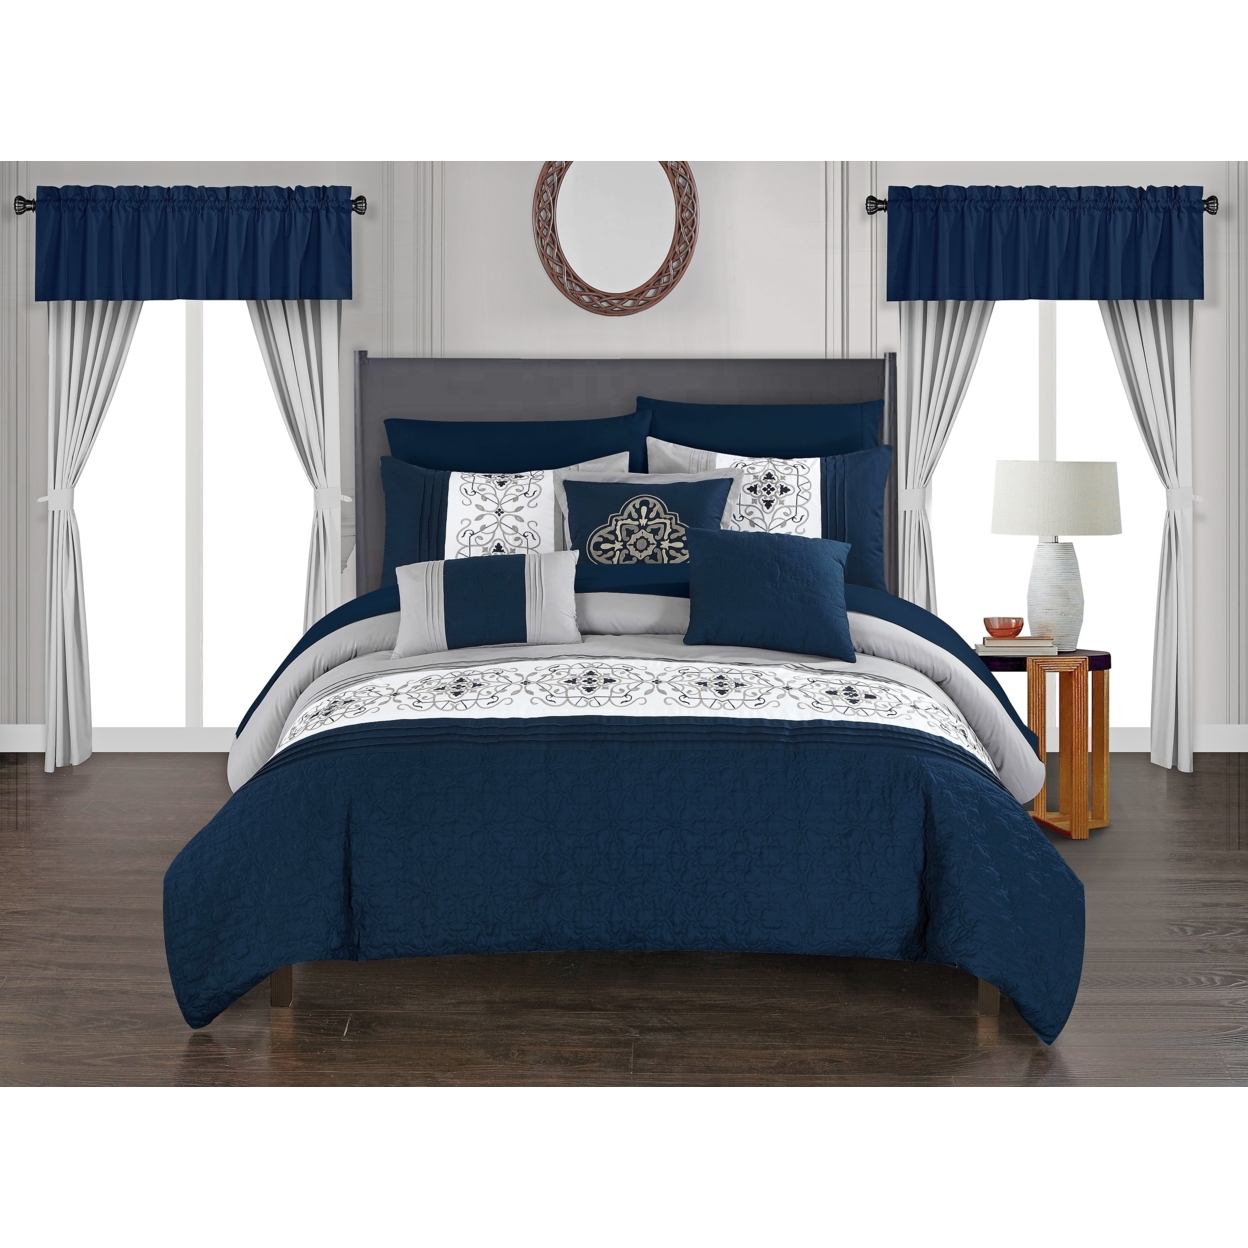 Jurgen 20-Piece Floral Embroidered Bed In A Bag Bedding And Comforter Set - Navy, Queen